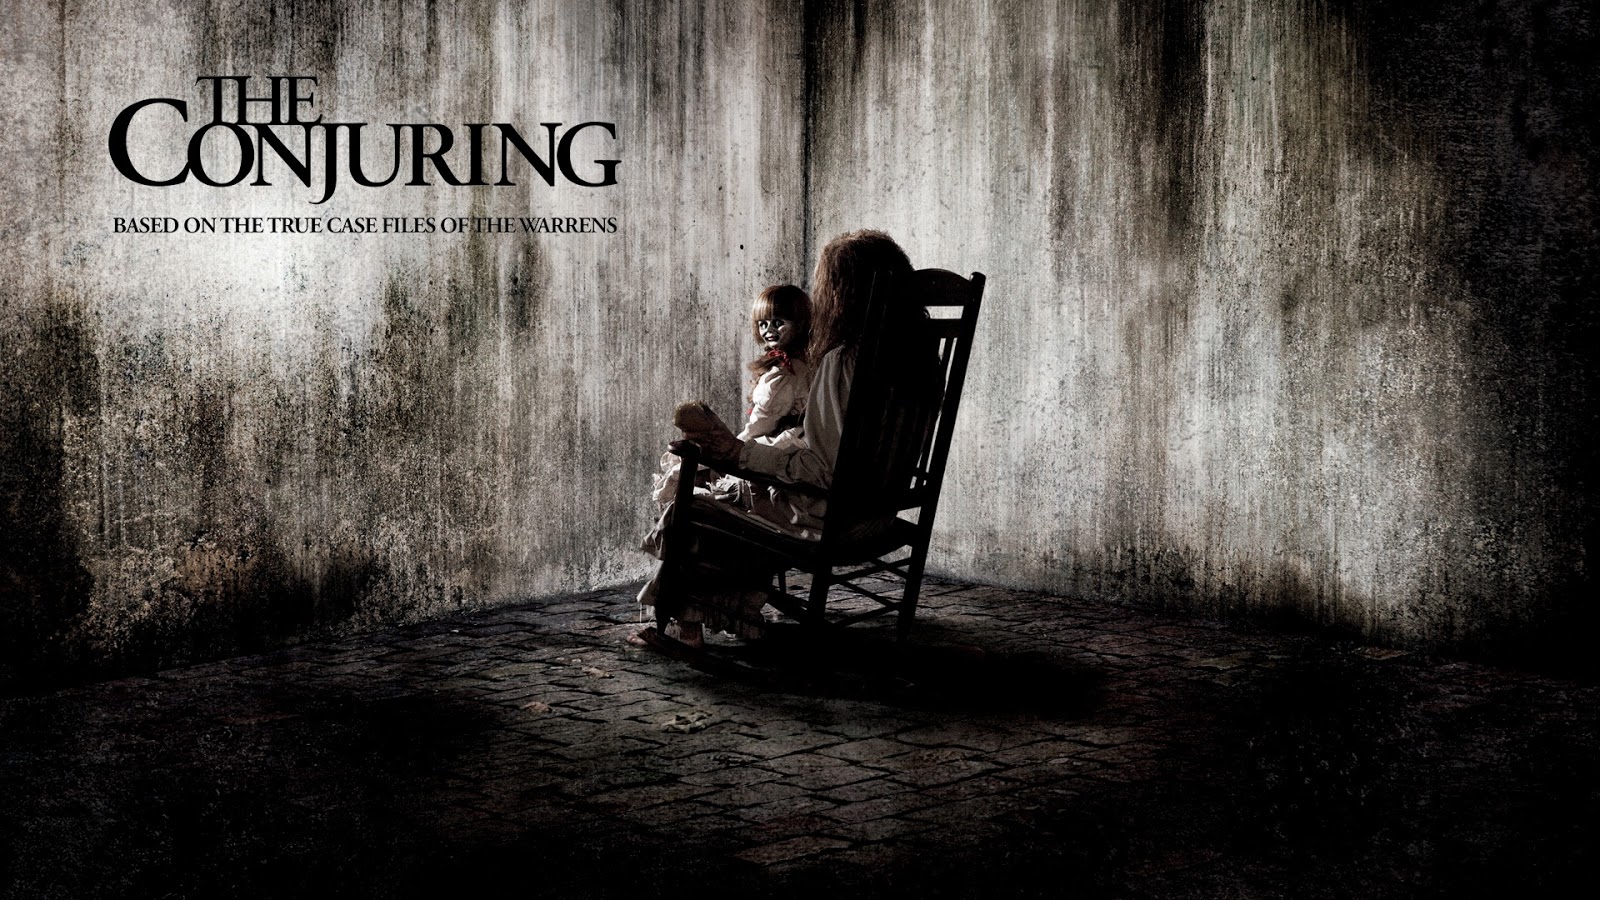 Horror The Conjuring Full Movie | One Popular1600 x 900